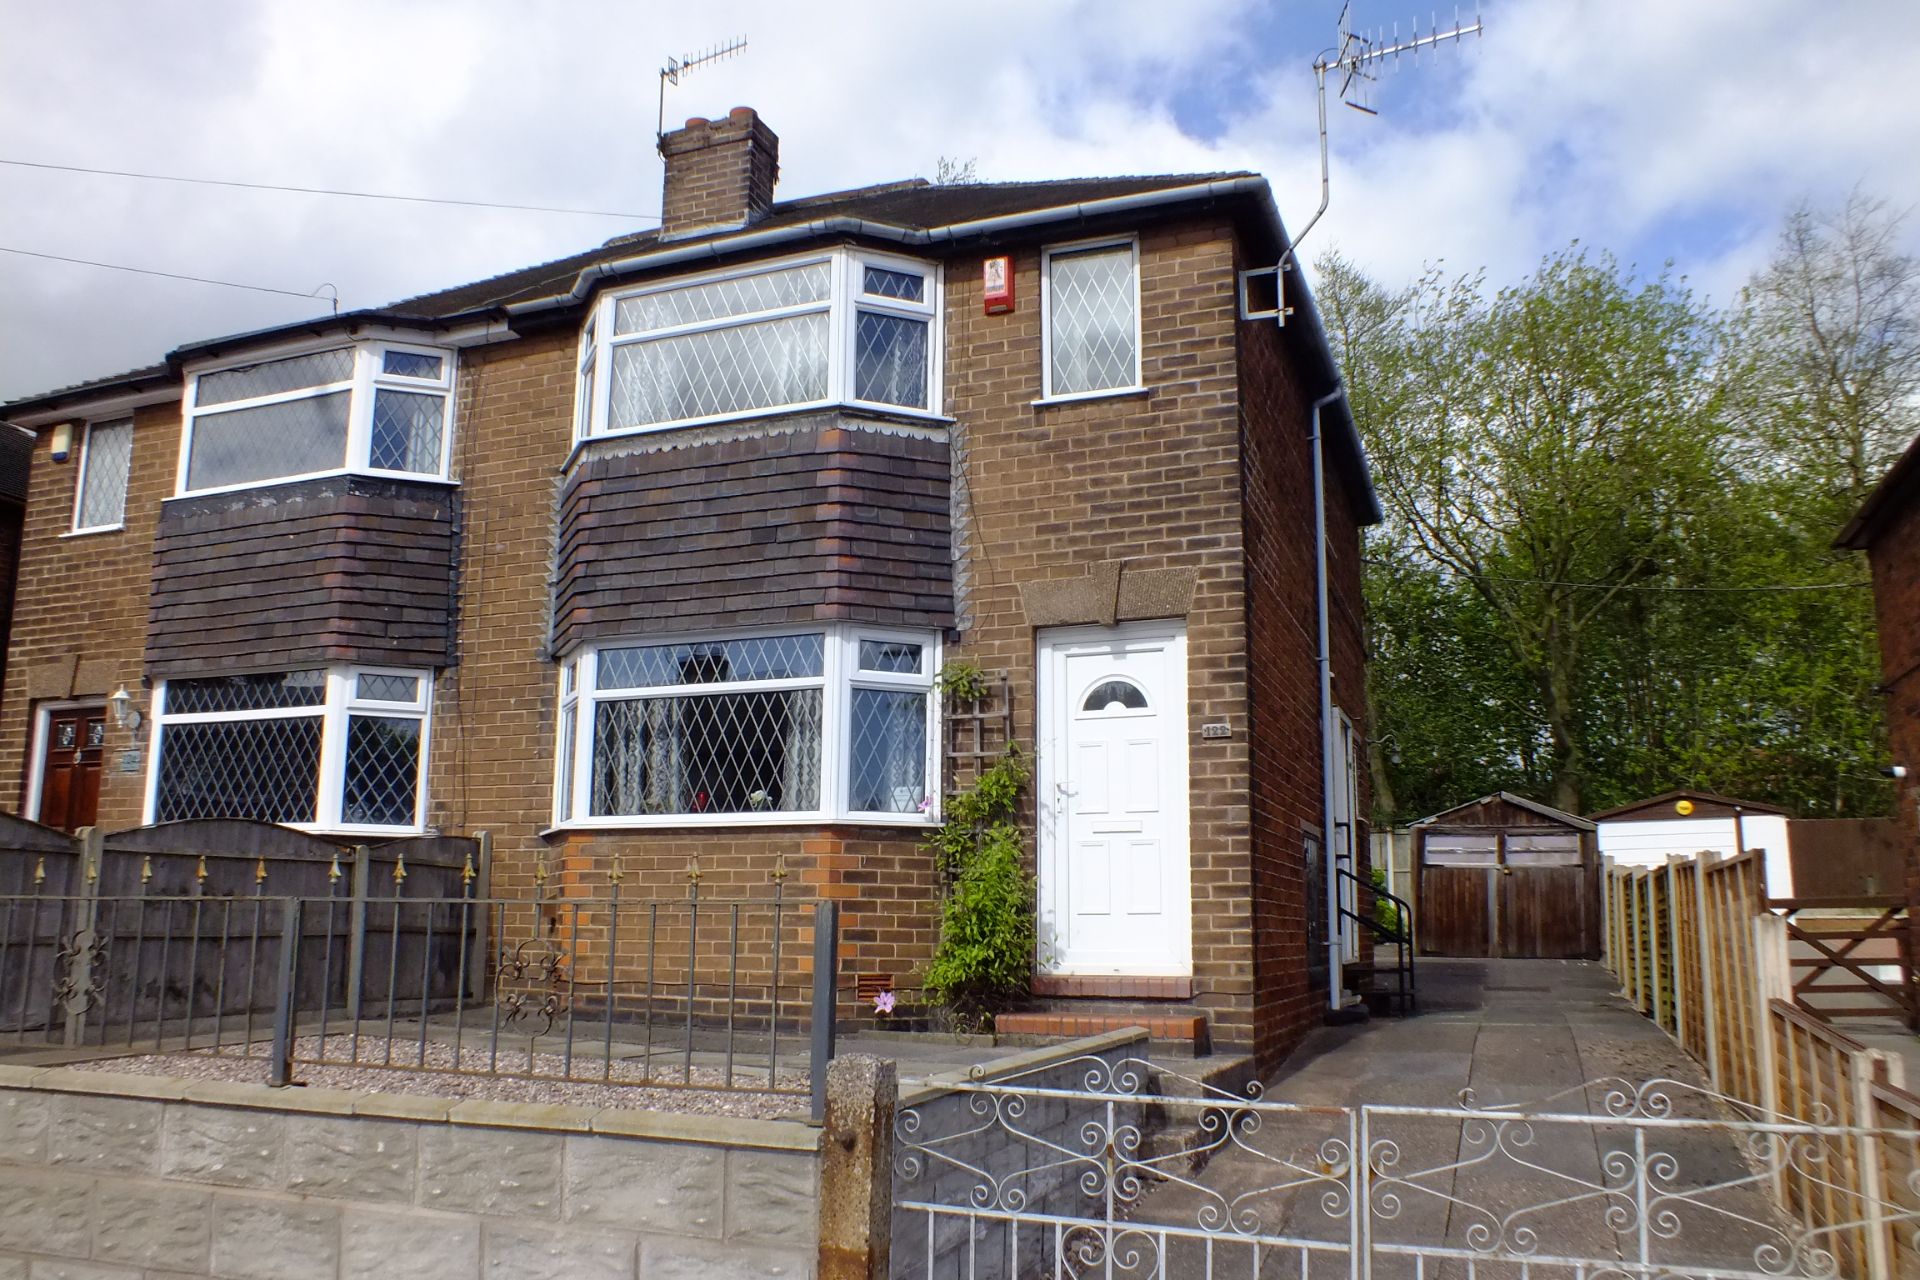 122 Clanway Street, Tunstall, Stoke-on-Trent, Staffordshire, ST6 5UJ
 
Three bedrooms
One